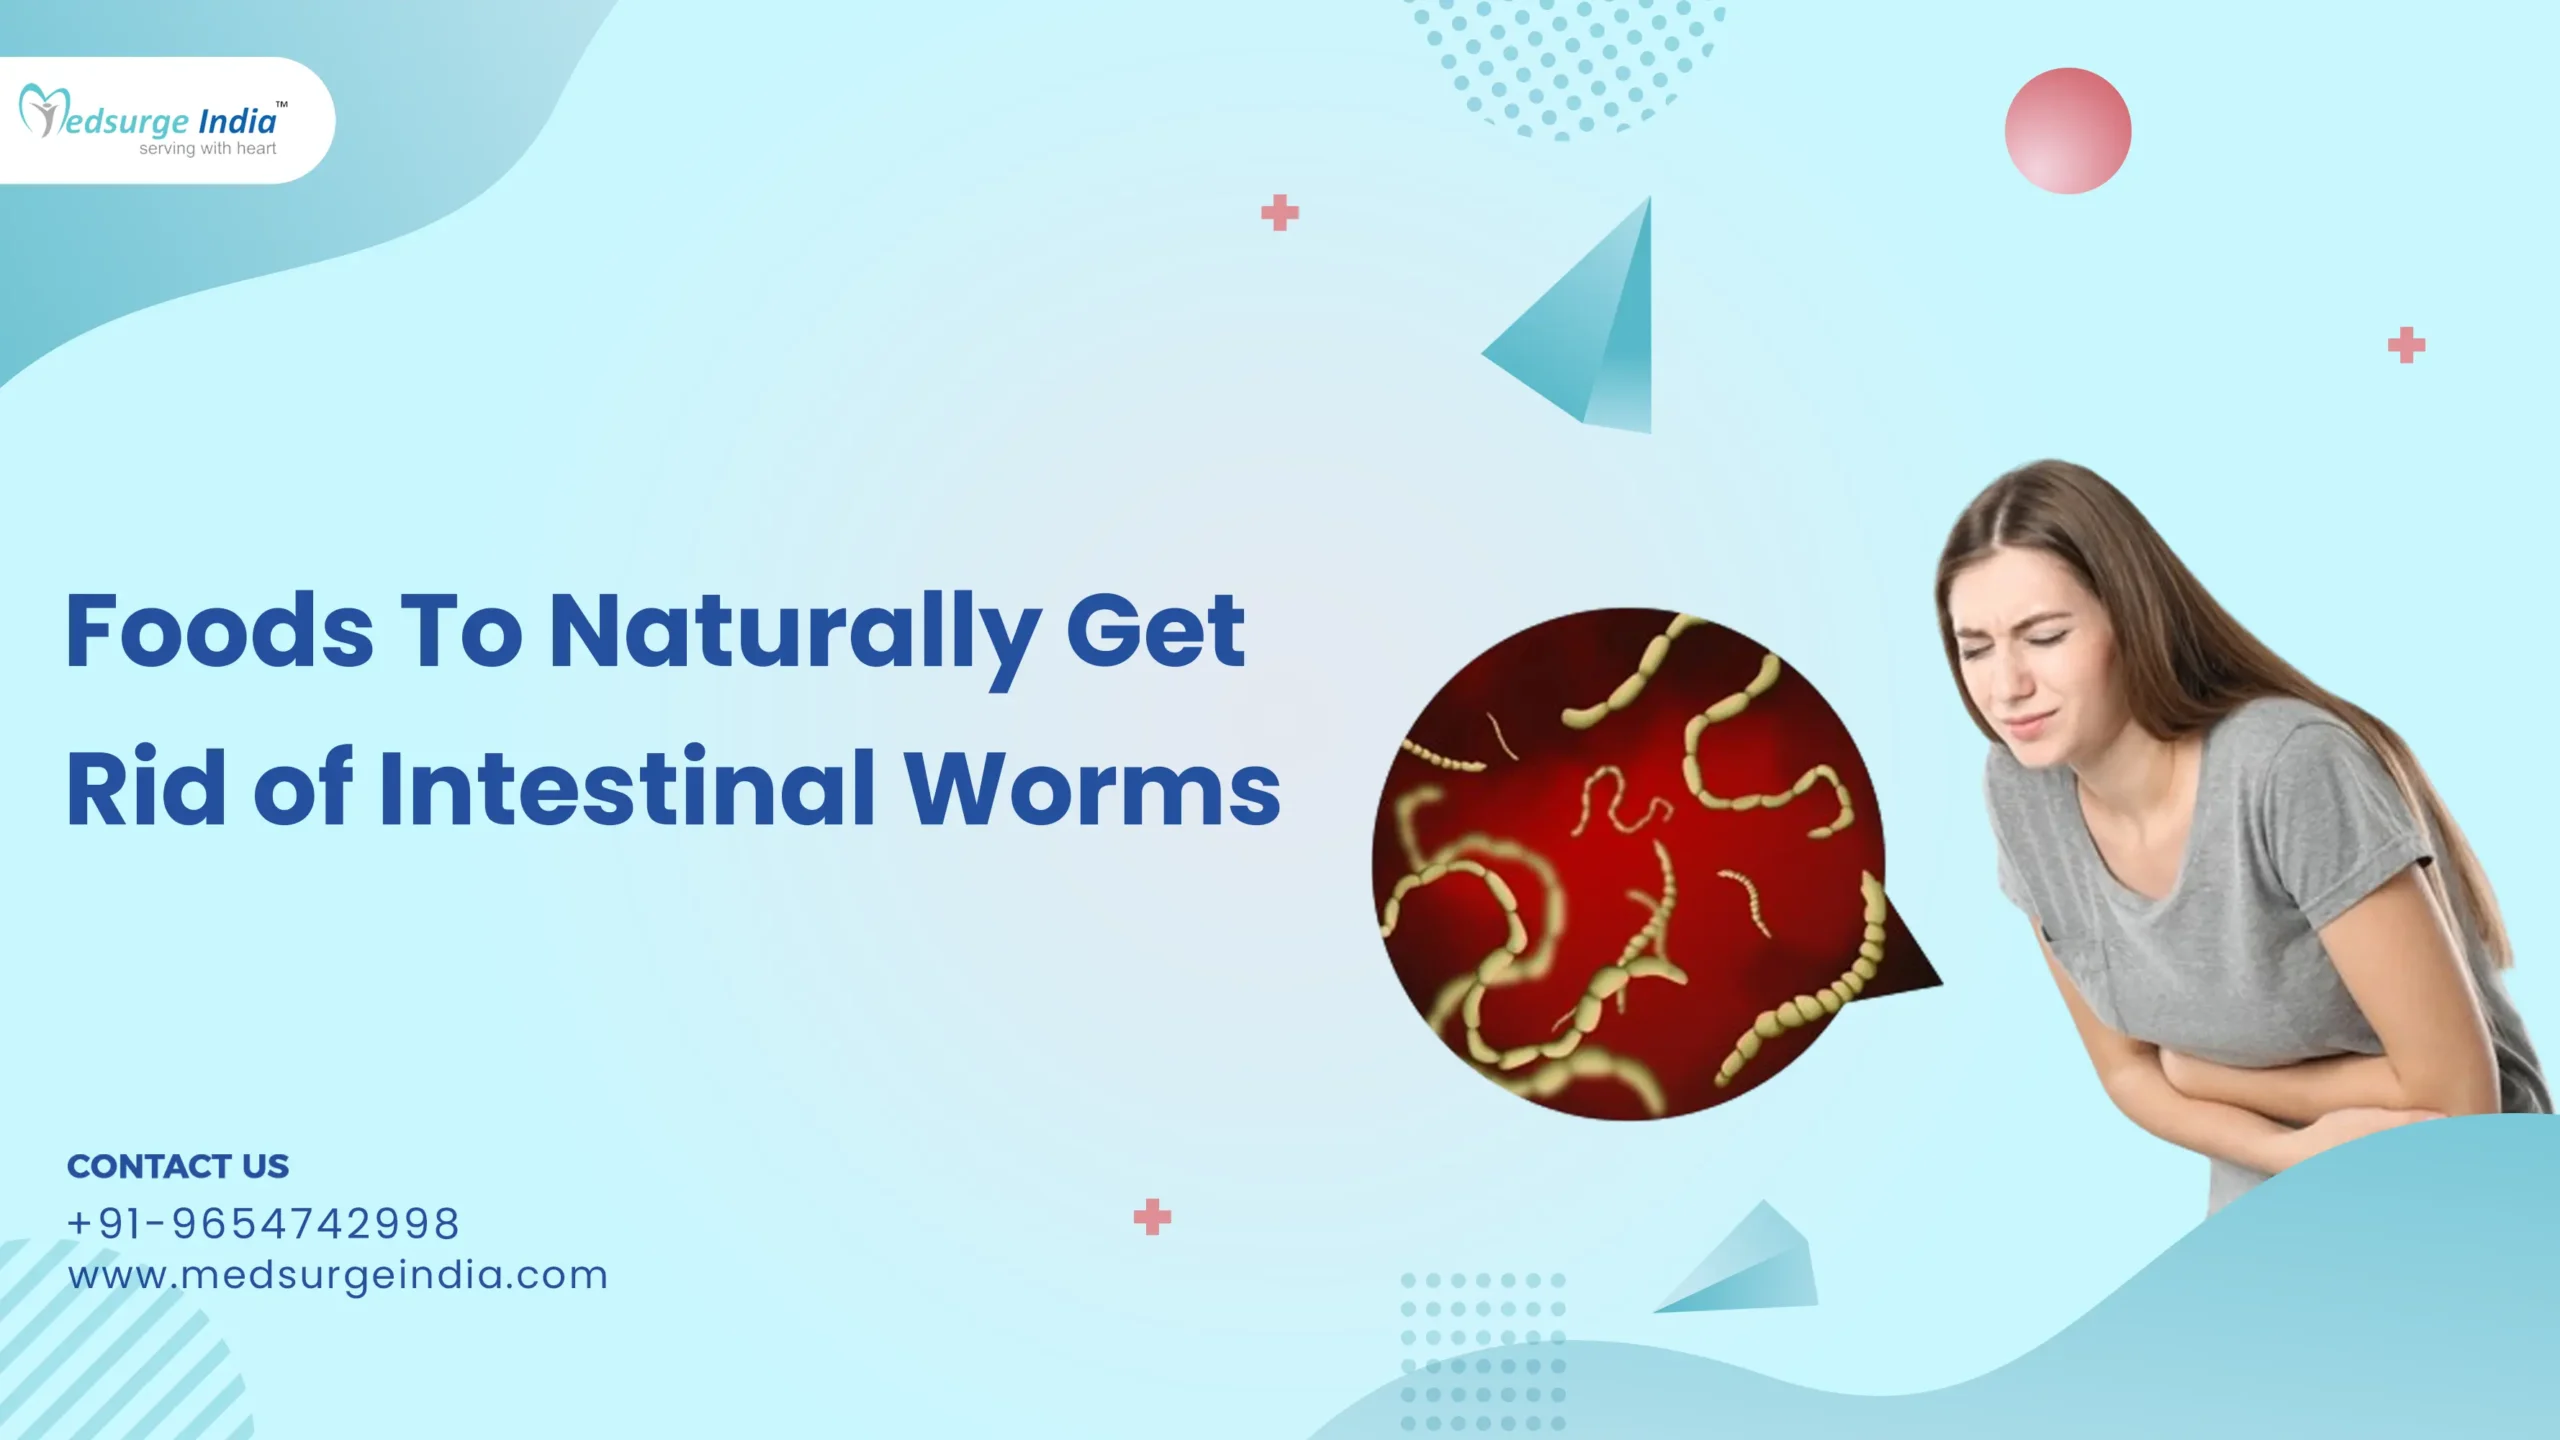 Foods To Naturally Get Rid of Intestinal Worms